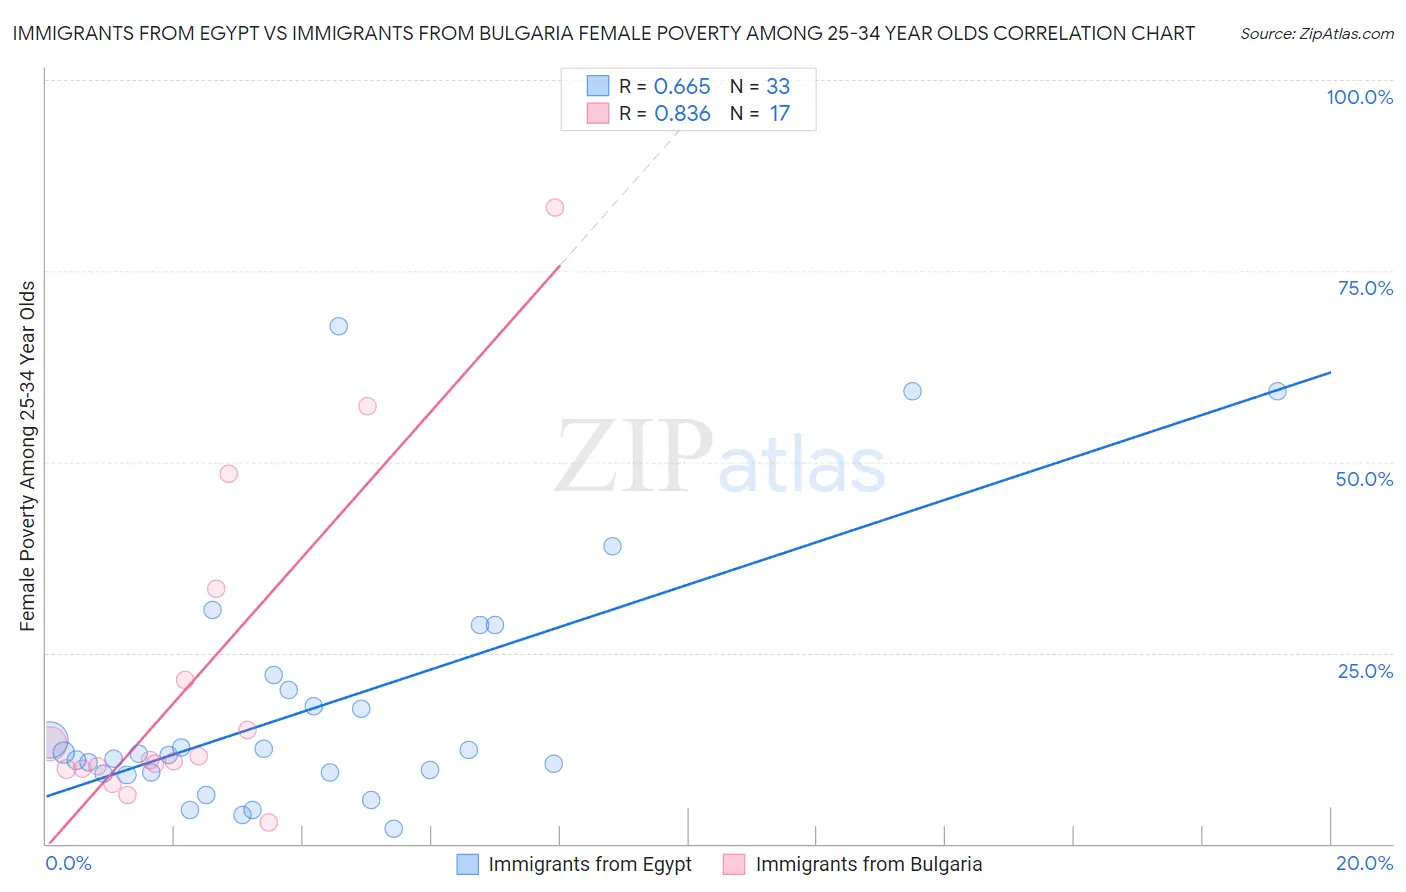 Immigrants from Egypt vs Immigrants from Bulgaria Female Poverty Among 25-34 Year Olds